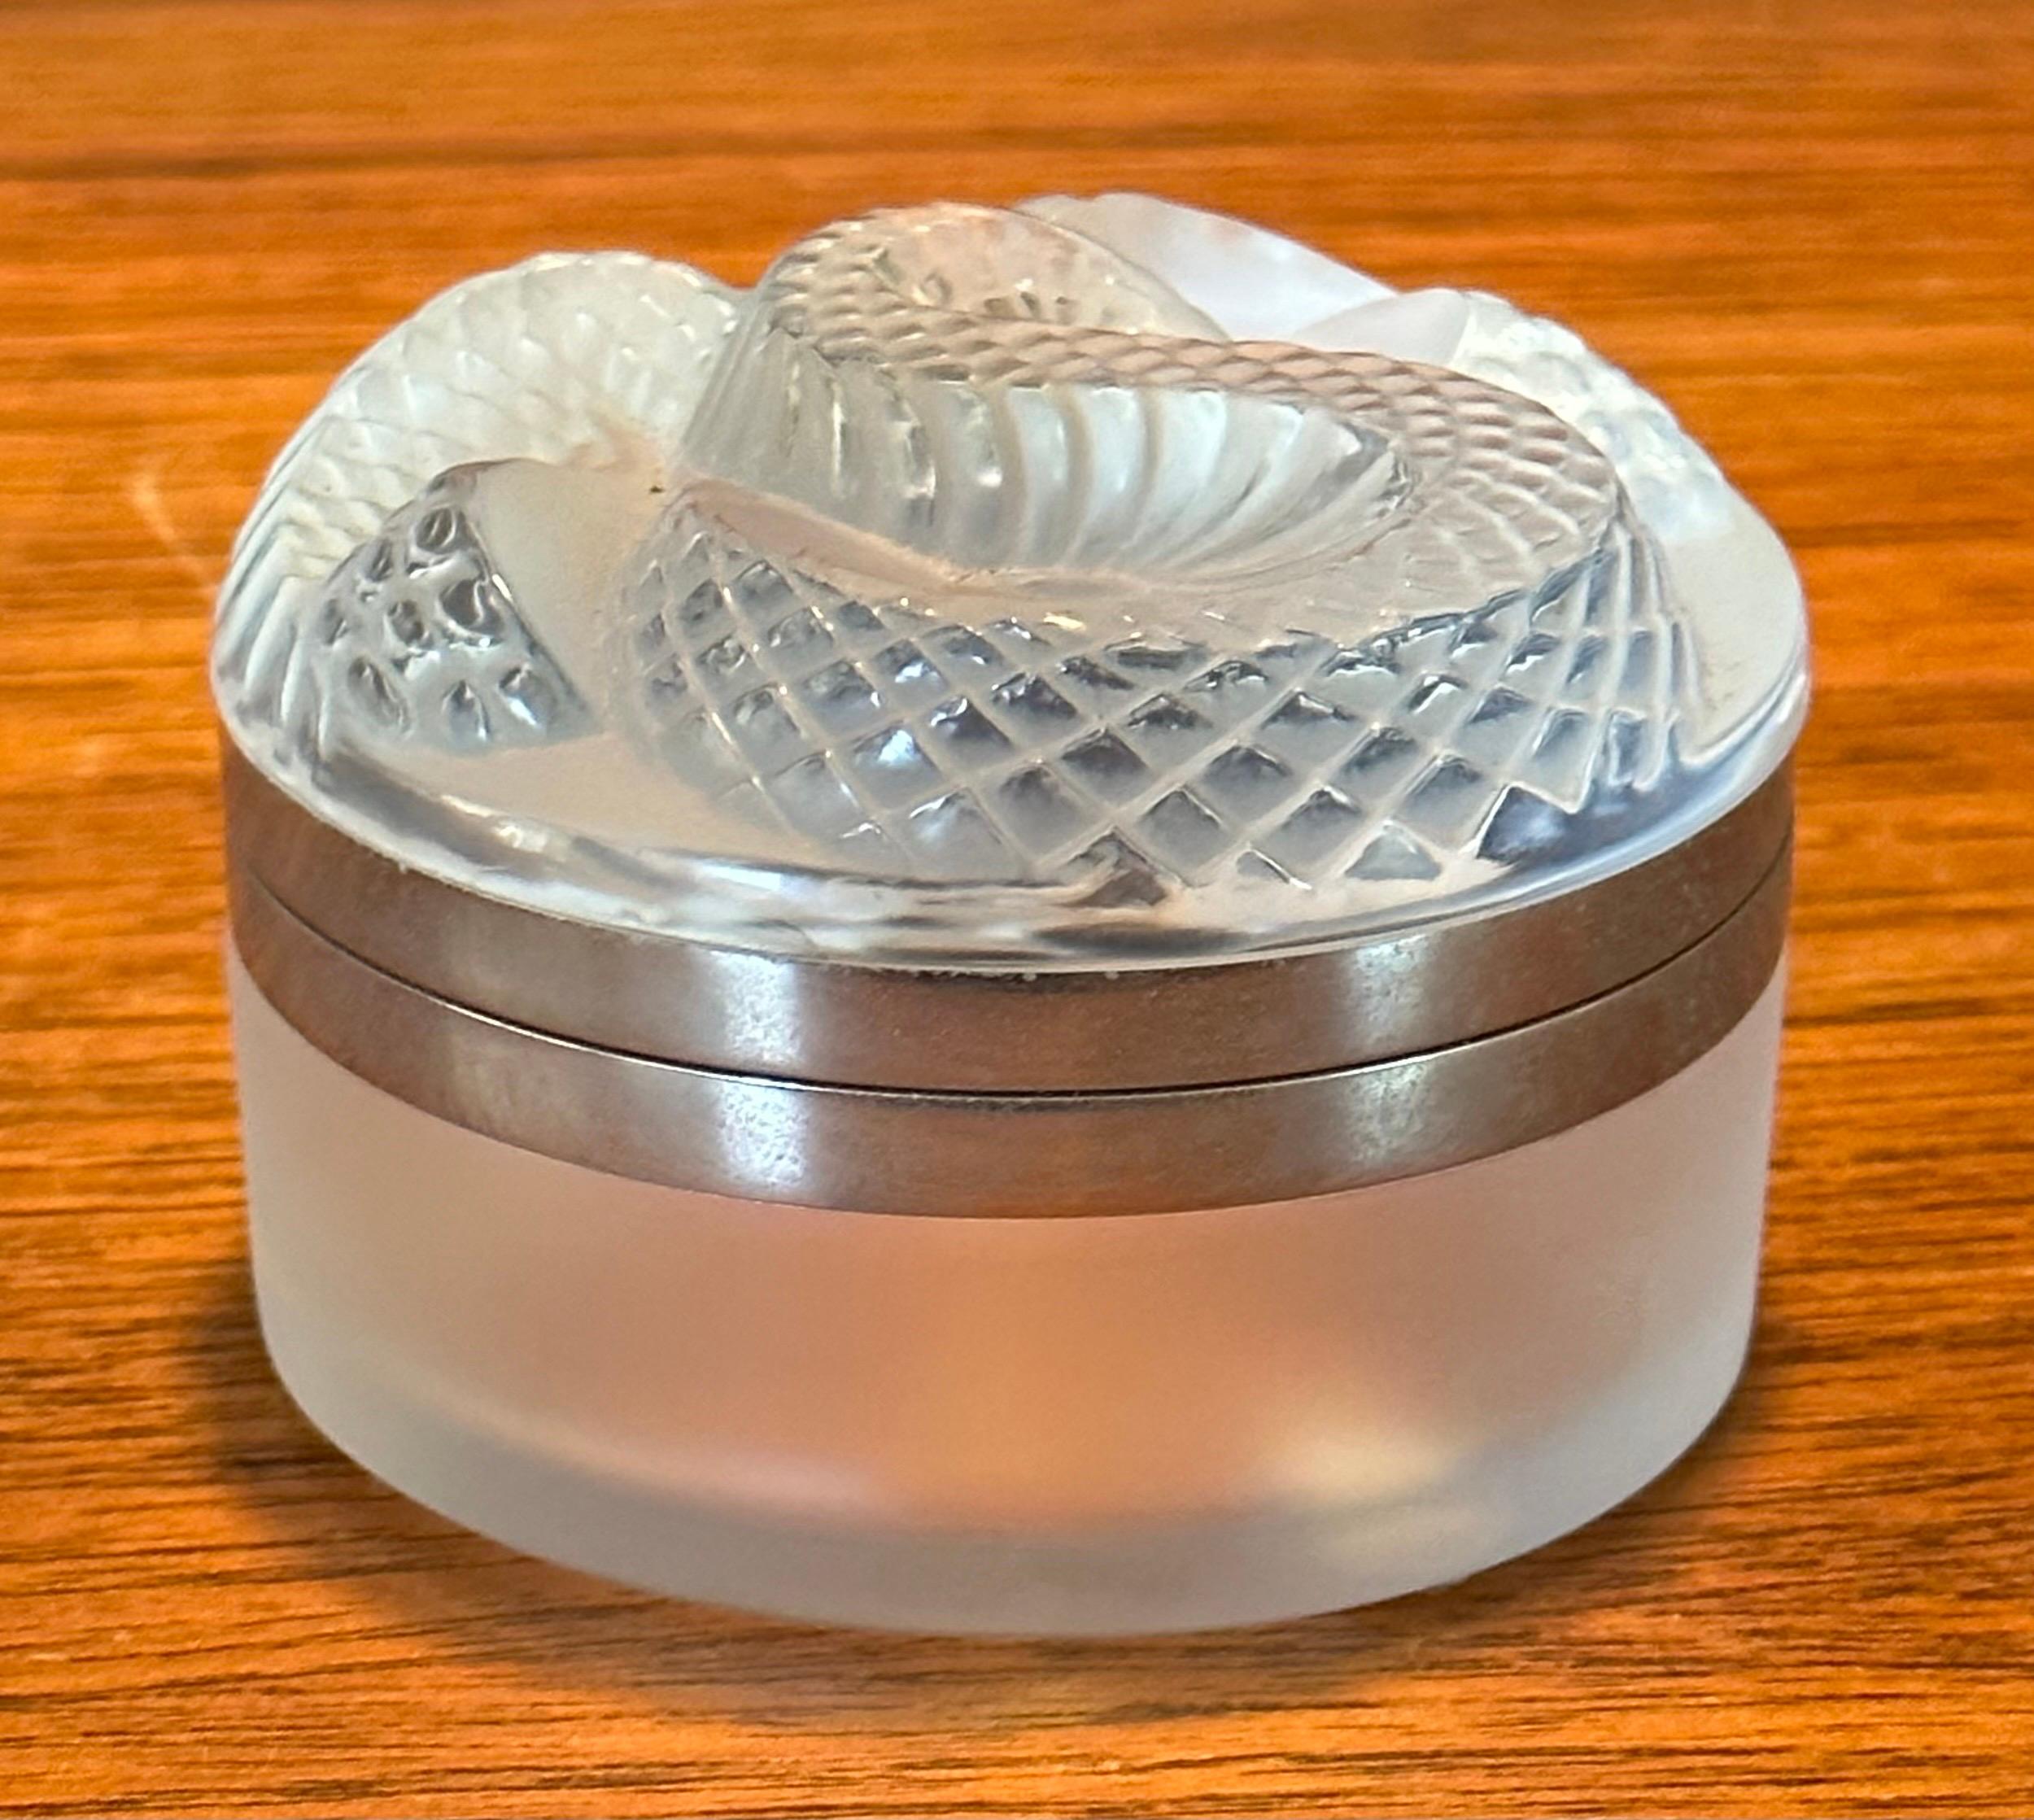 Frosted Crystal Coiled Serpent / Snake Lidded Powder Jar by Lalique of France 5